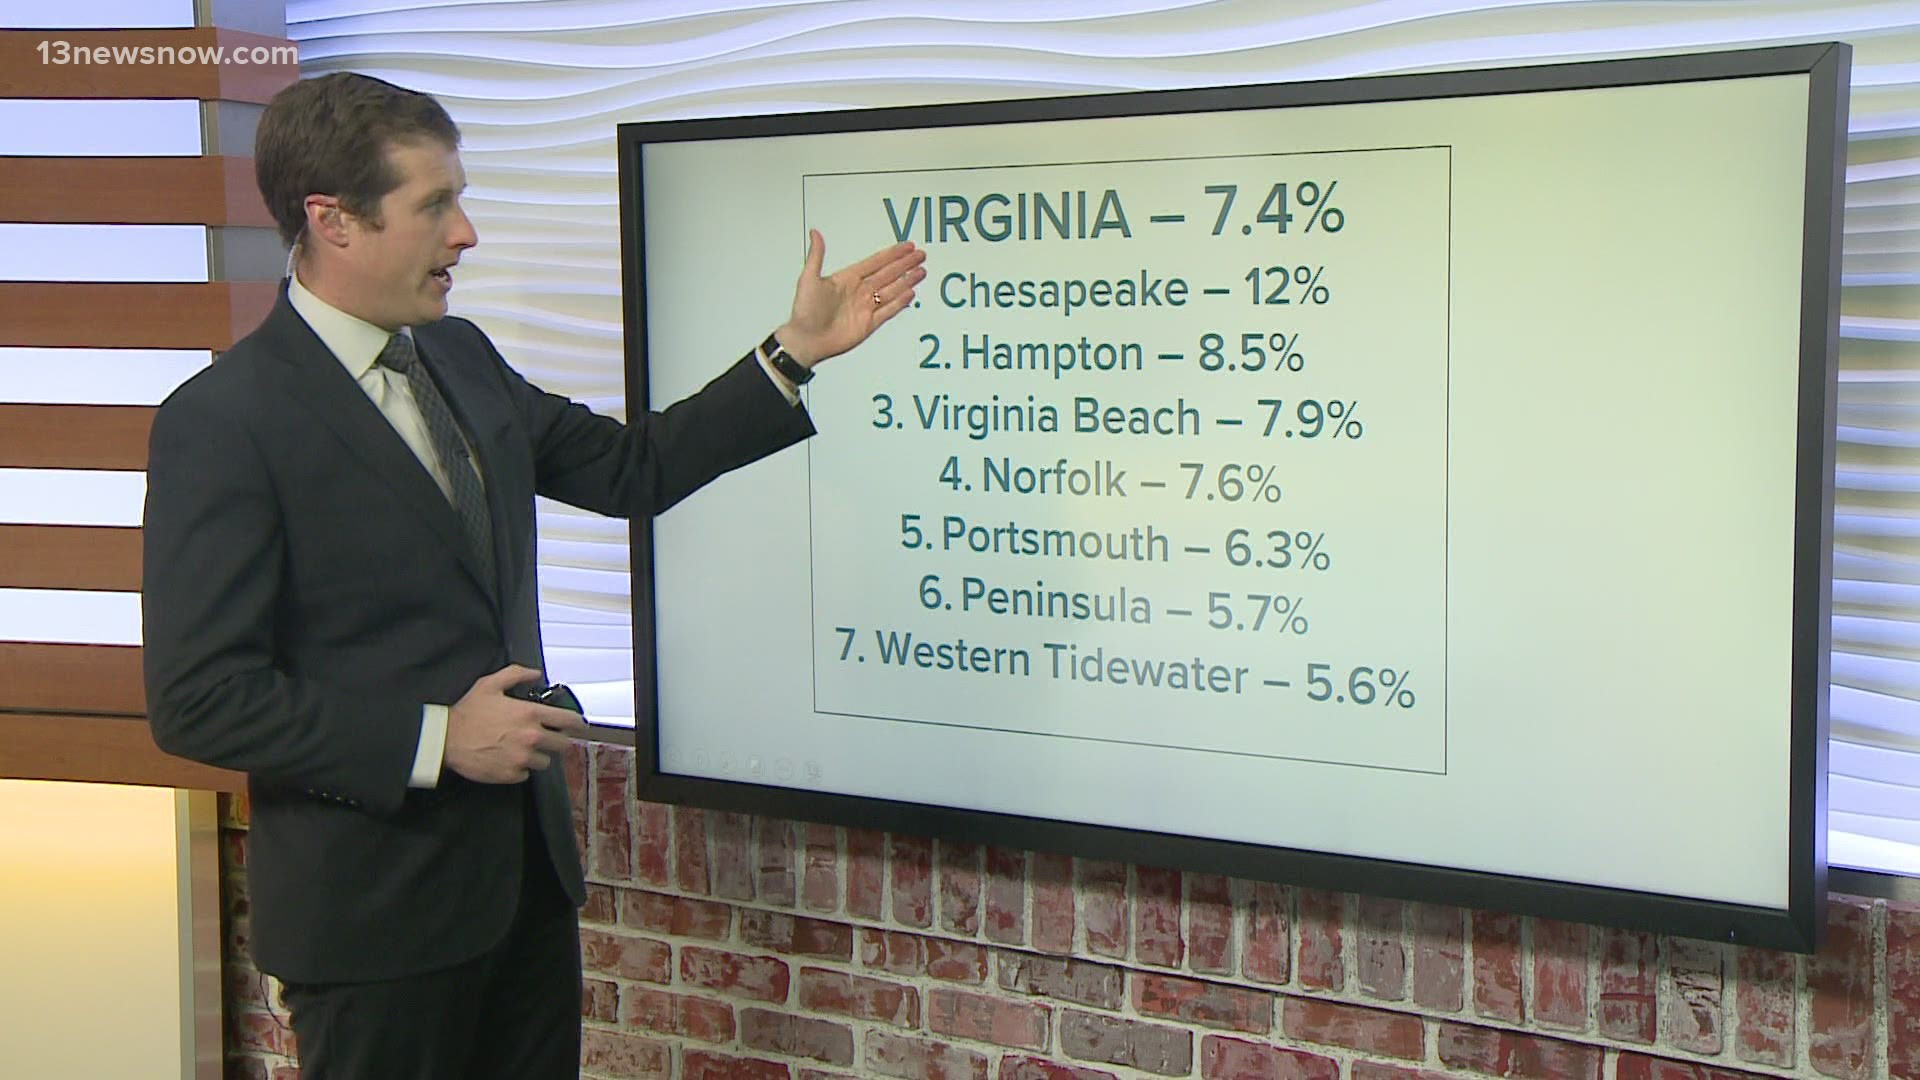 Virginia saw 42,000 new coronavirus cases in November, more than any other month. More cities in Hampton Roads are also seeing concerning trends in COVID-19 numbers.